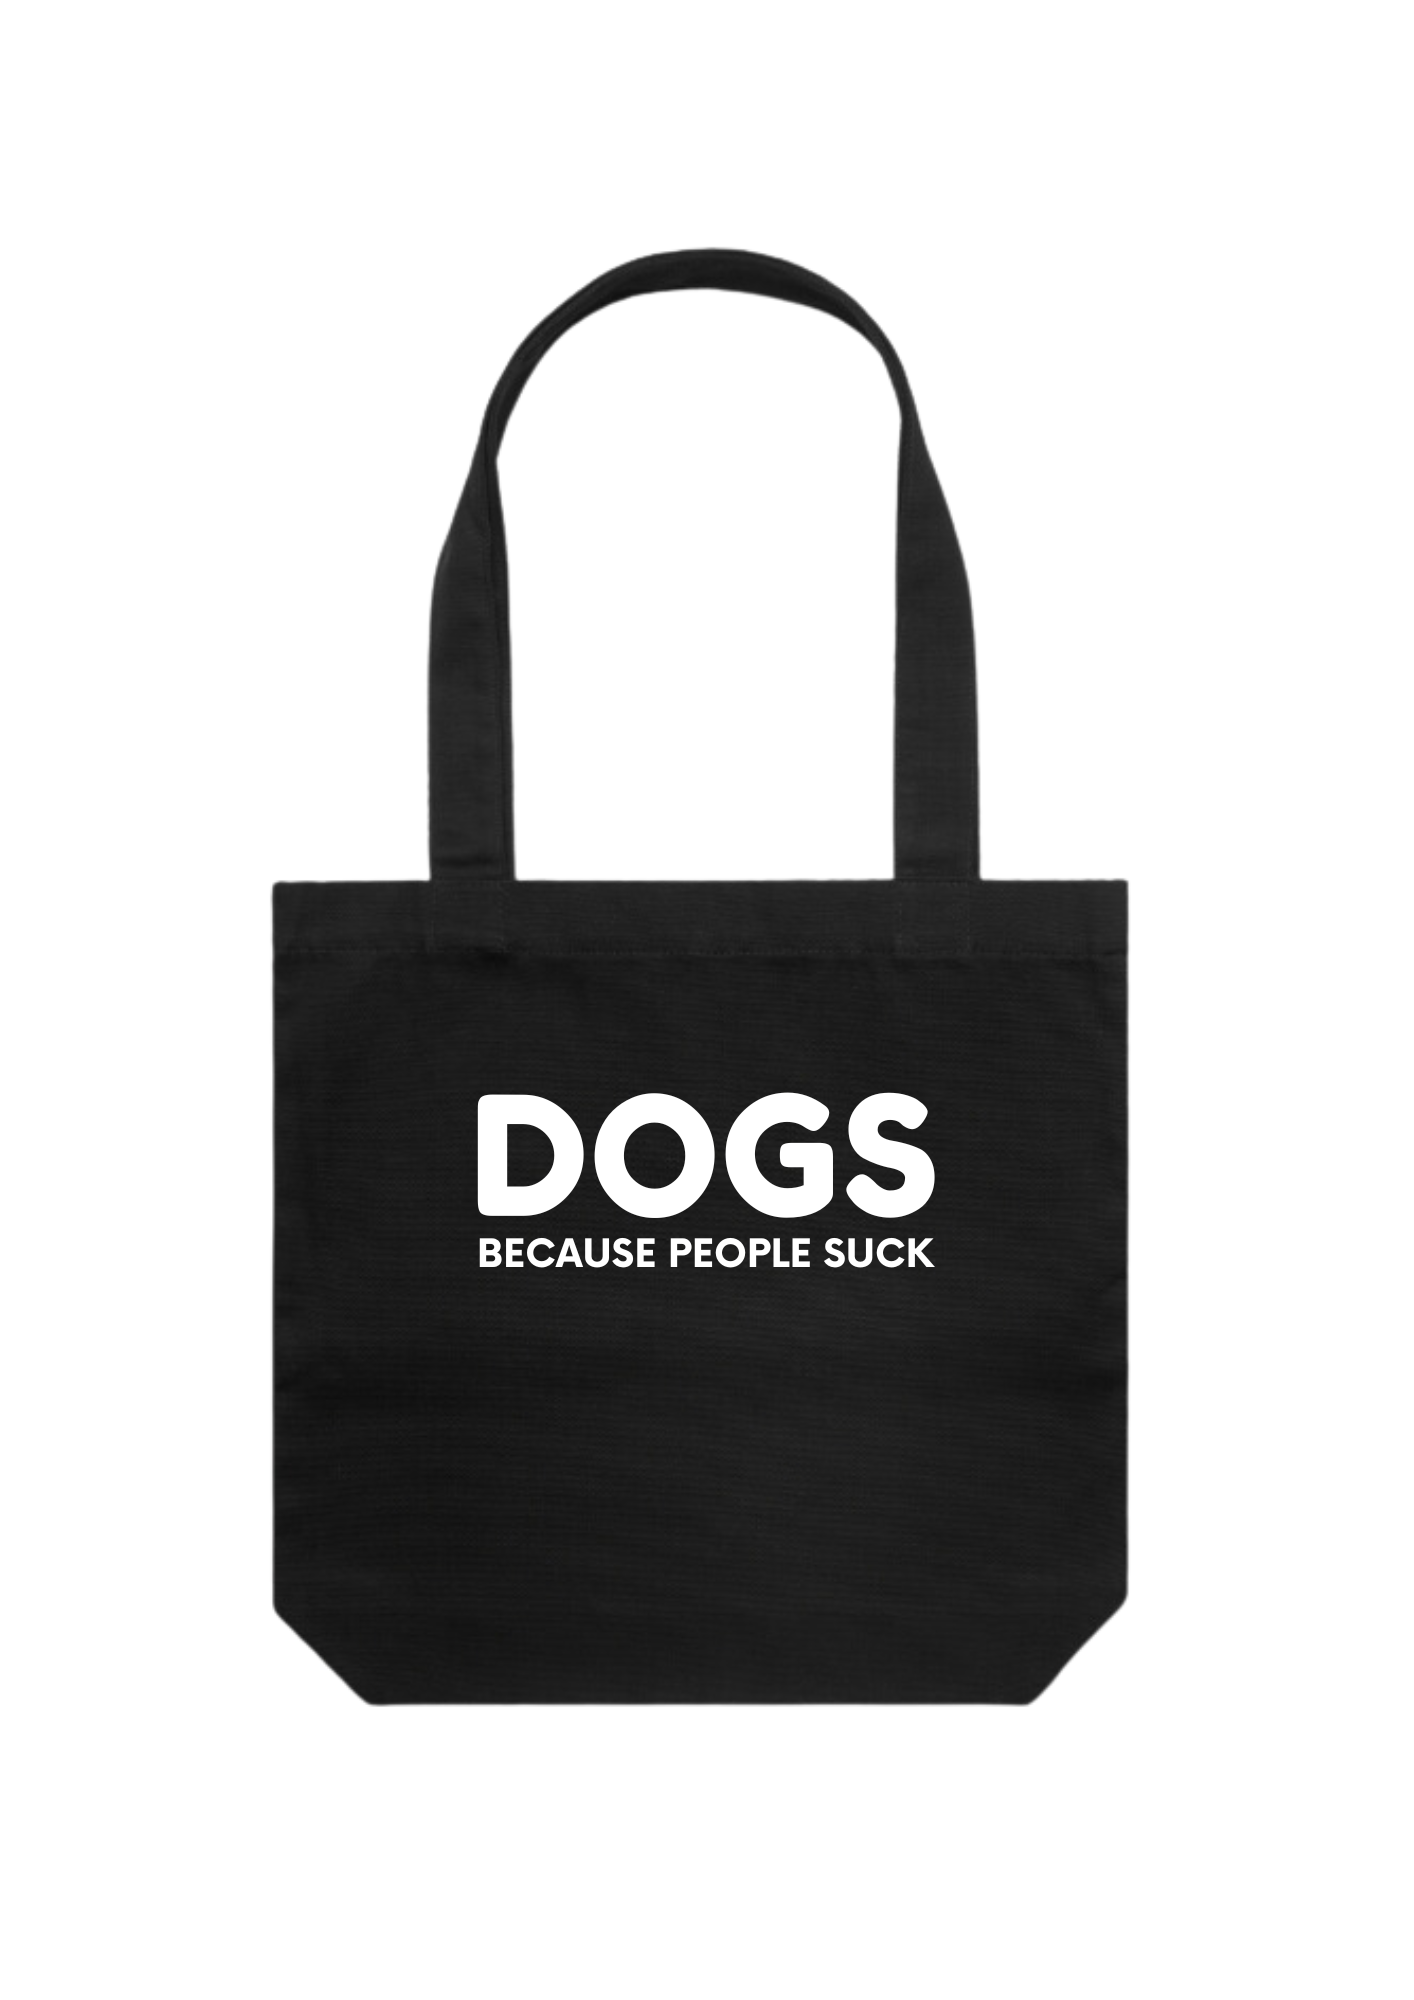 dog lover quote cotton canvas tote bag customisable tote bag